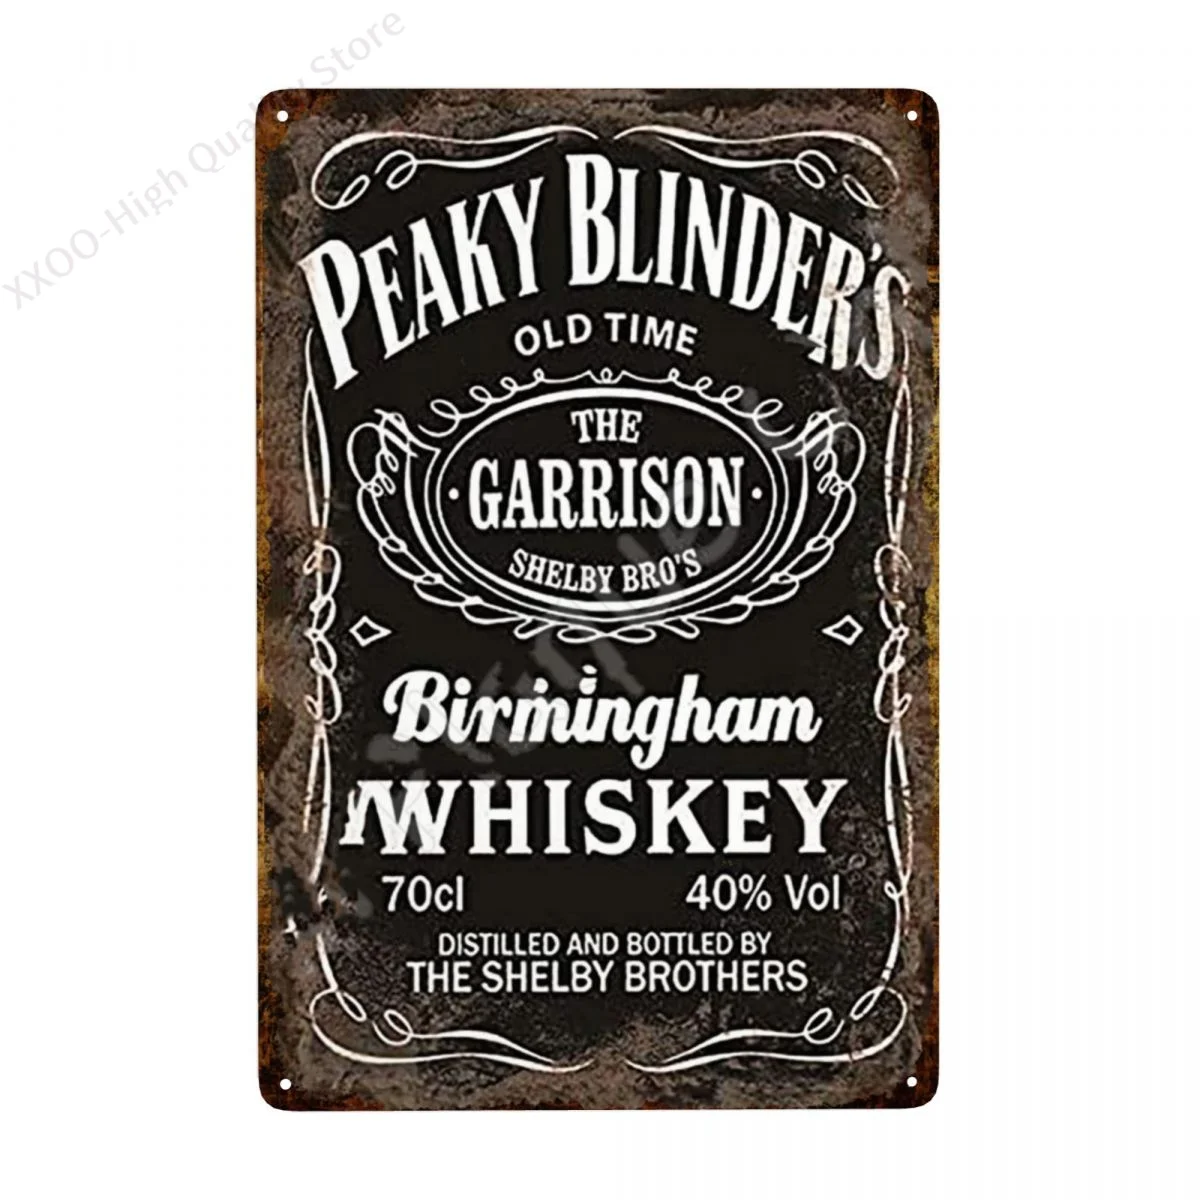 

Vintage Tin Sign Peaky Blinders Whiskey Metal Sign Poster Retro Art Plaque Wall Decor for Home Bar Pub Cafe Restaurant 8x12 Inch